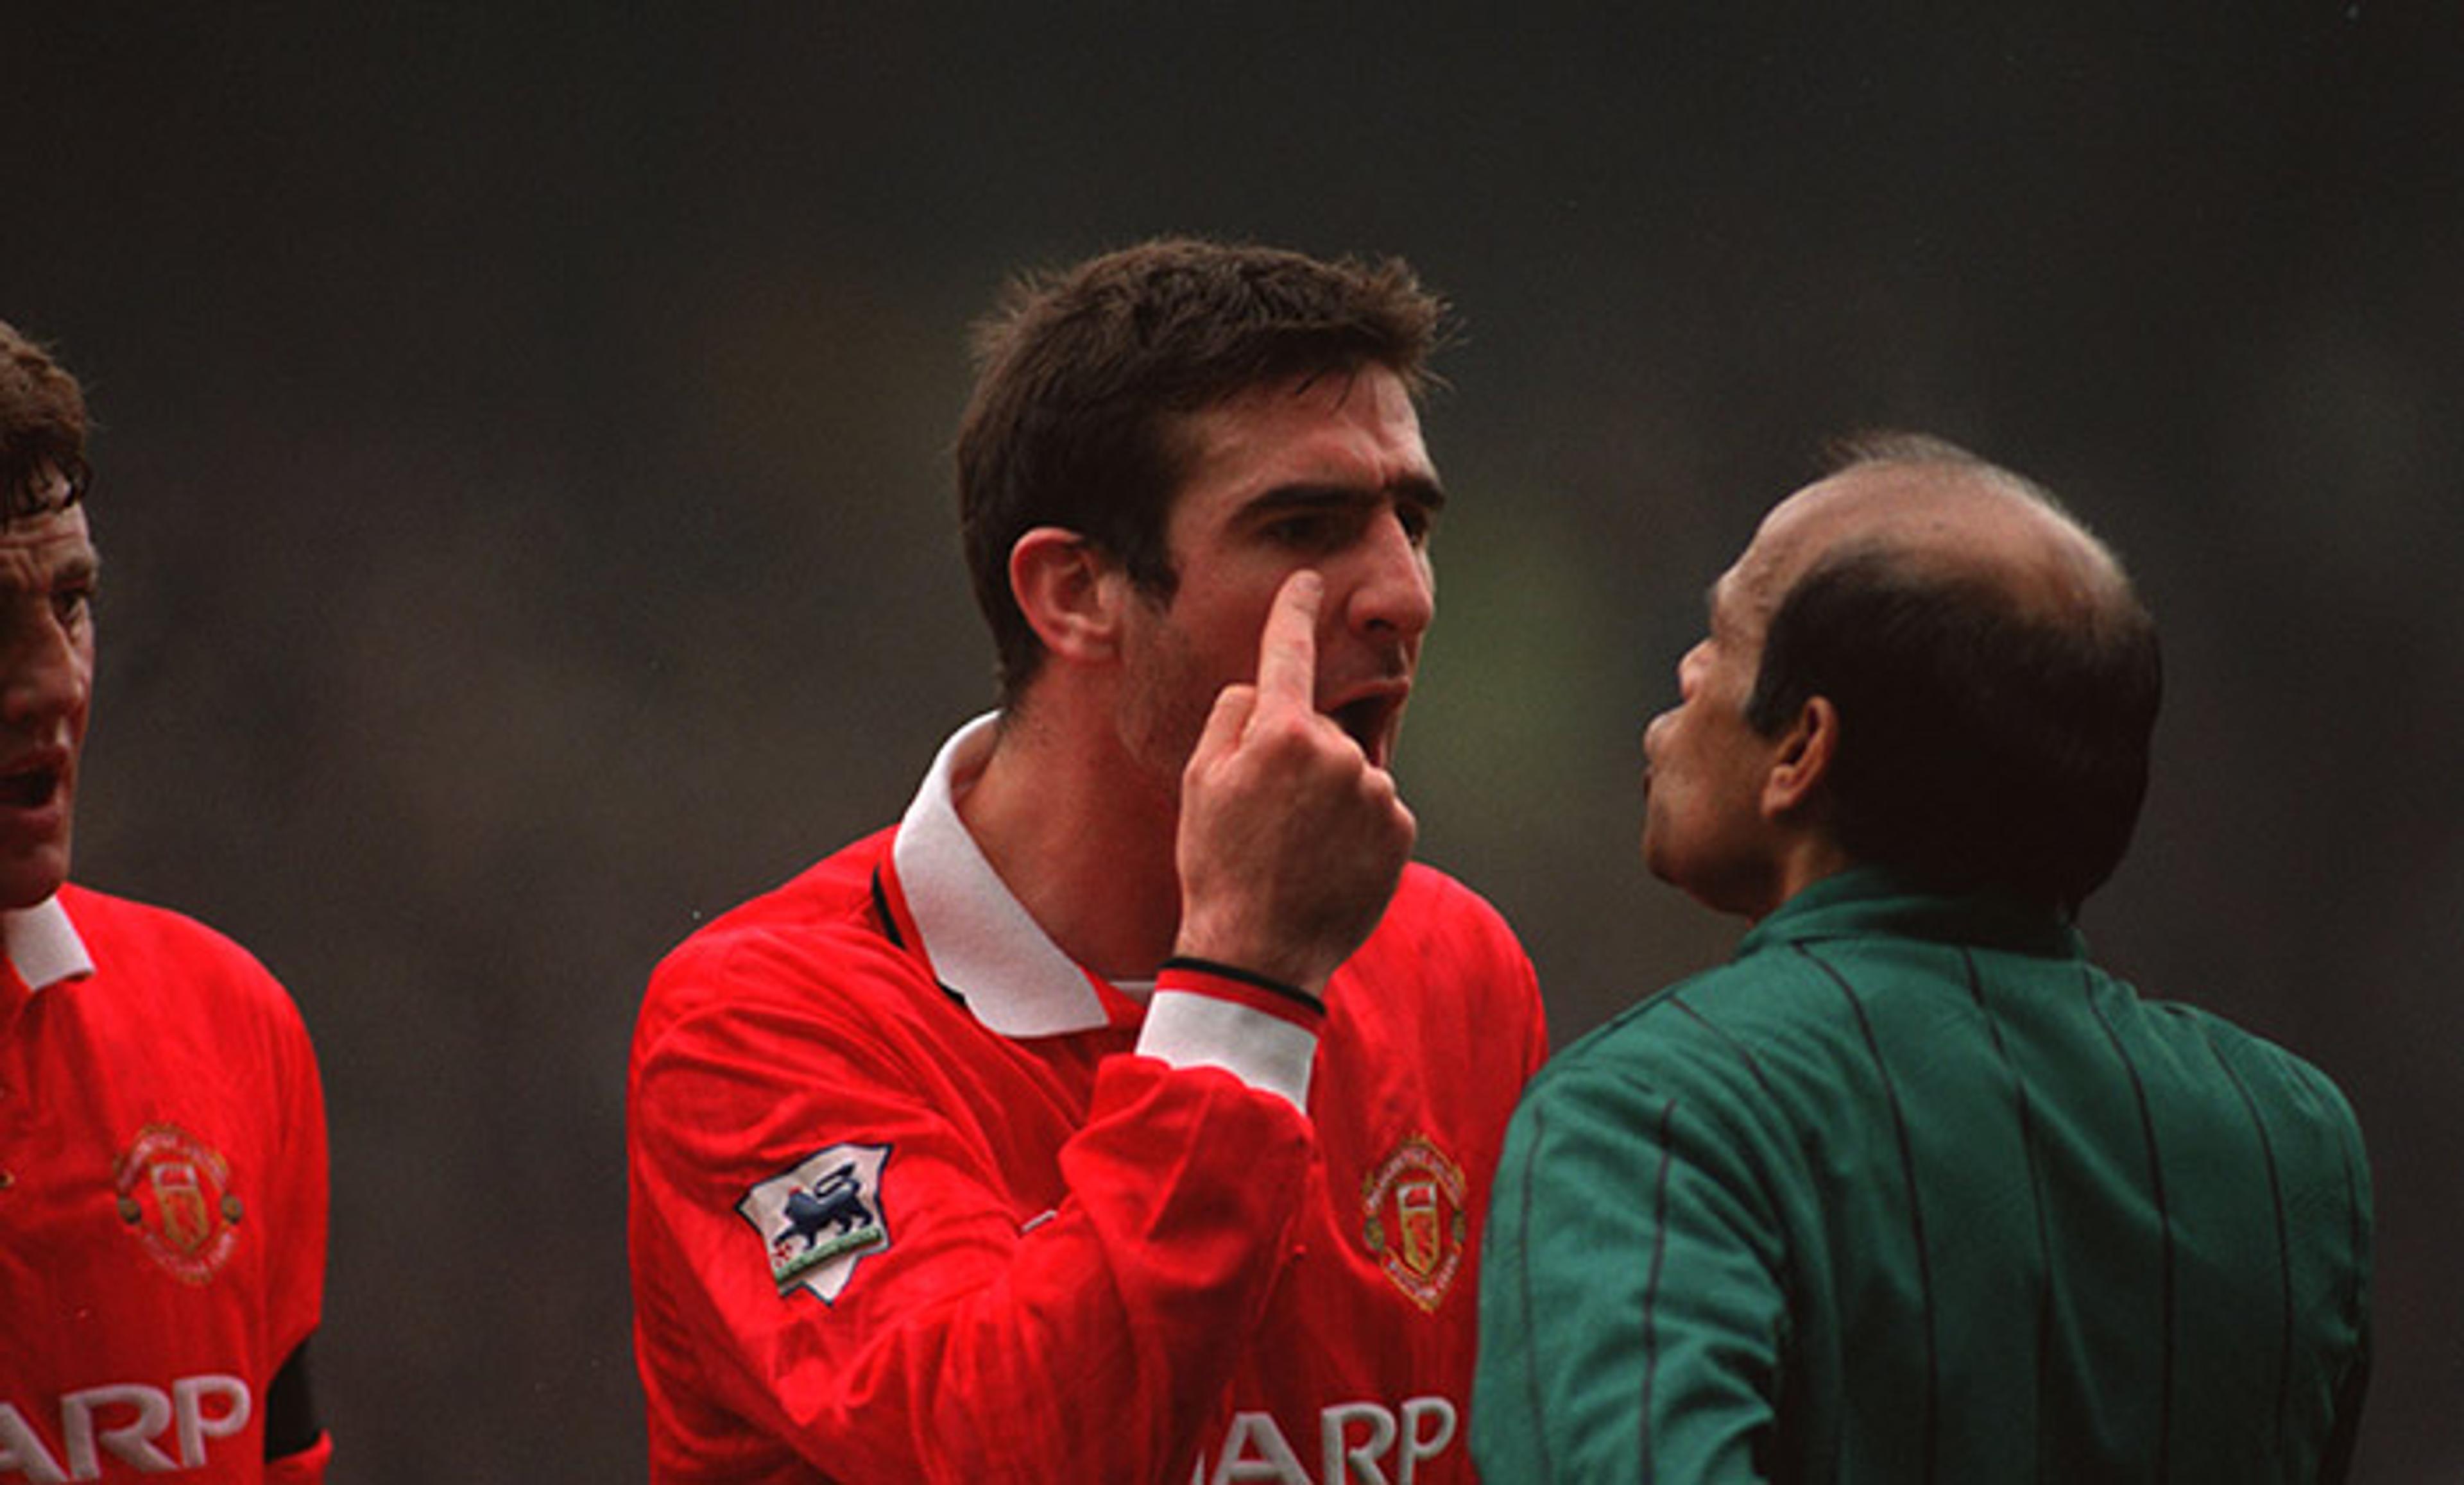 <p>Mercurial Manchester United player Eric Cantona has something in his eye. <em>Photo by Bob Thomas/Getty</em></p>